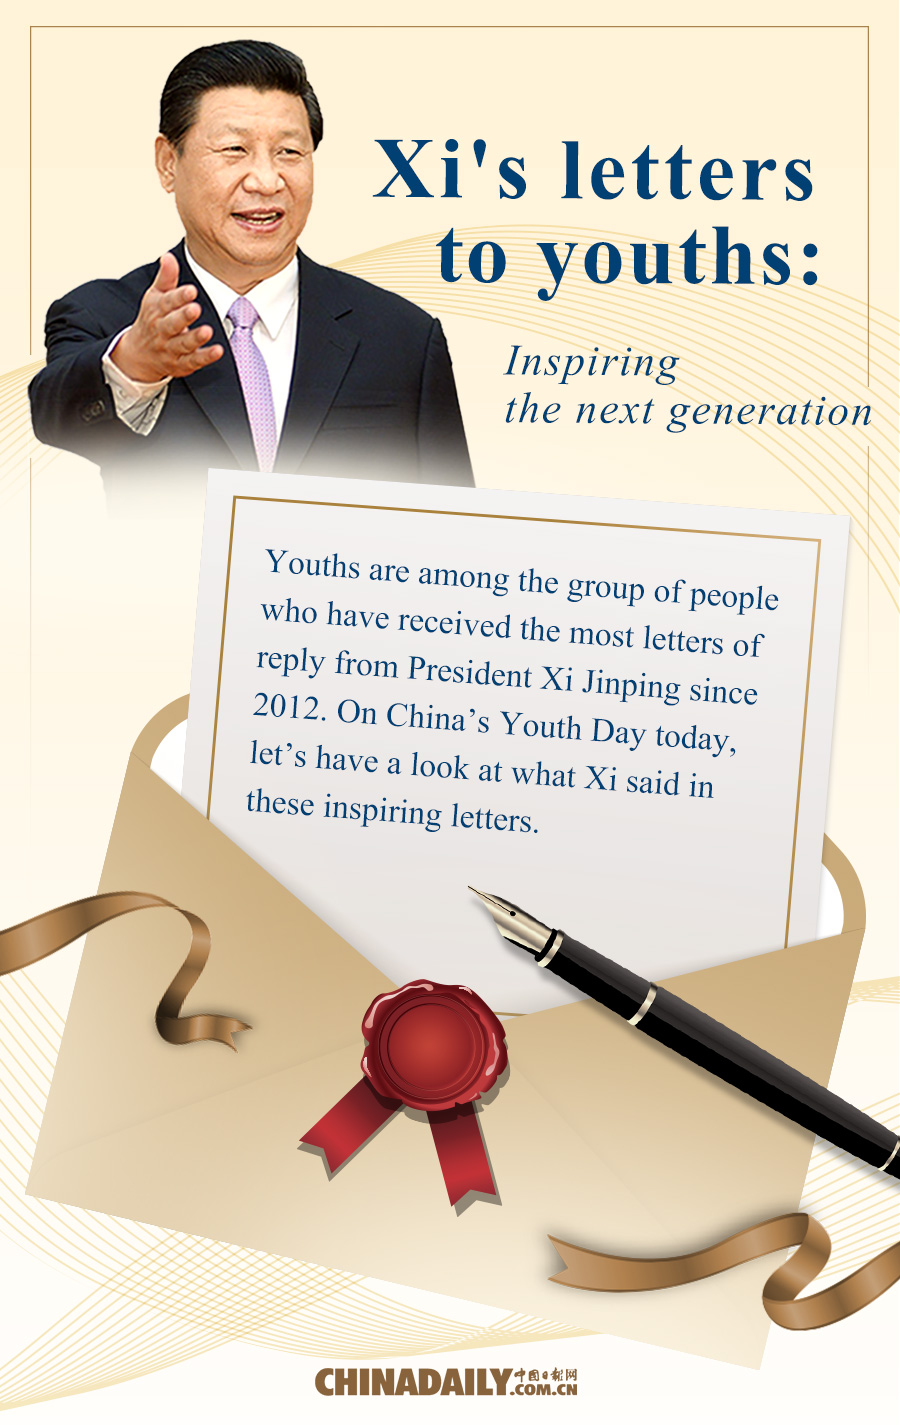 Xi's letters to youths: Inspiring the next generation